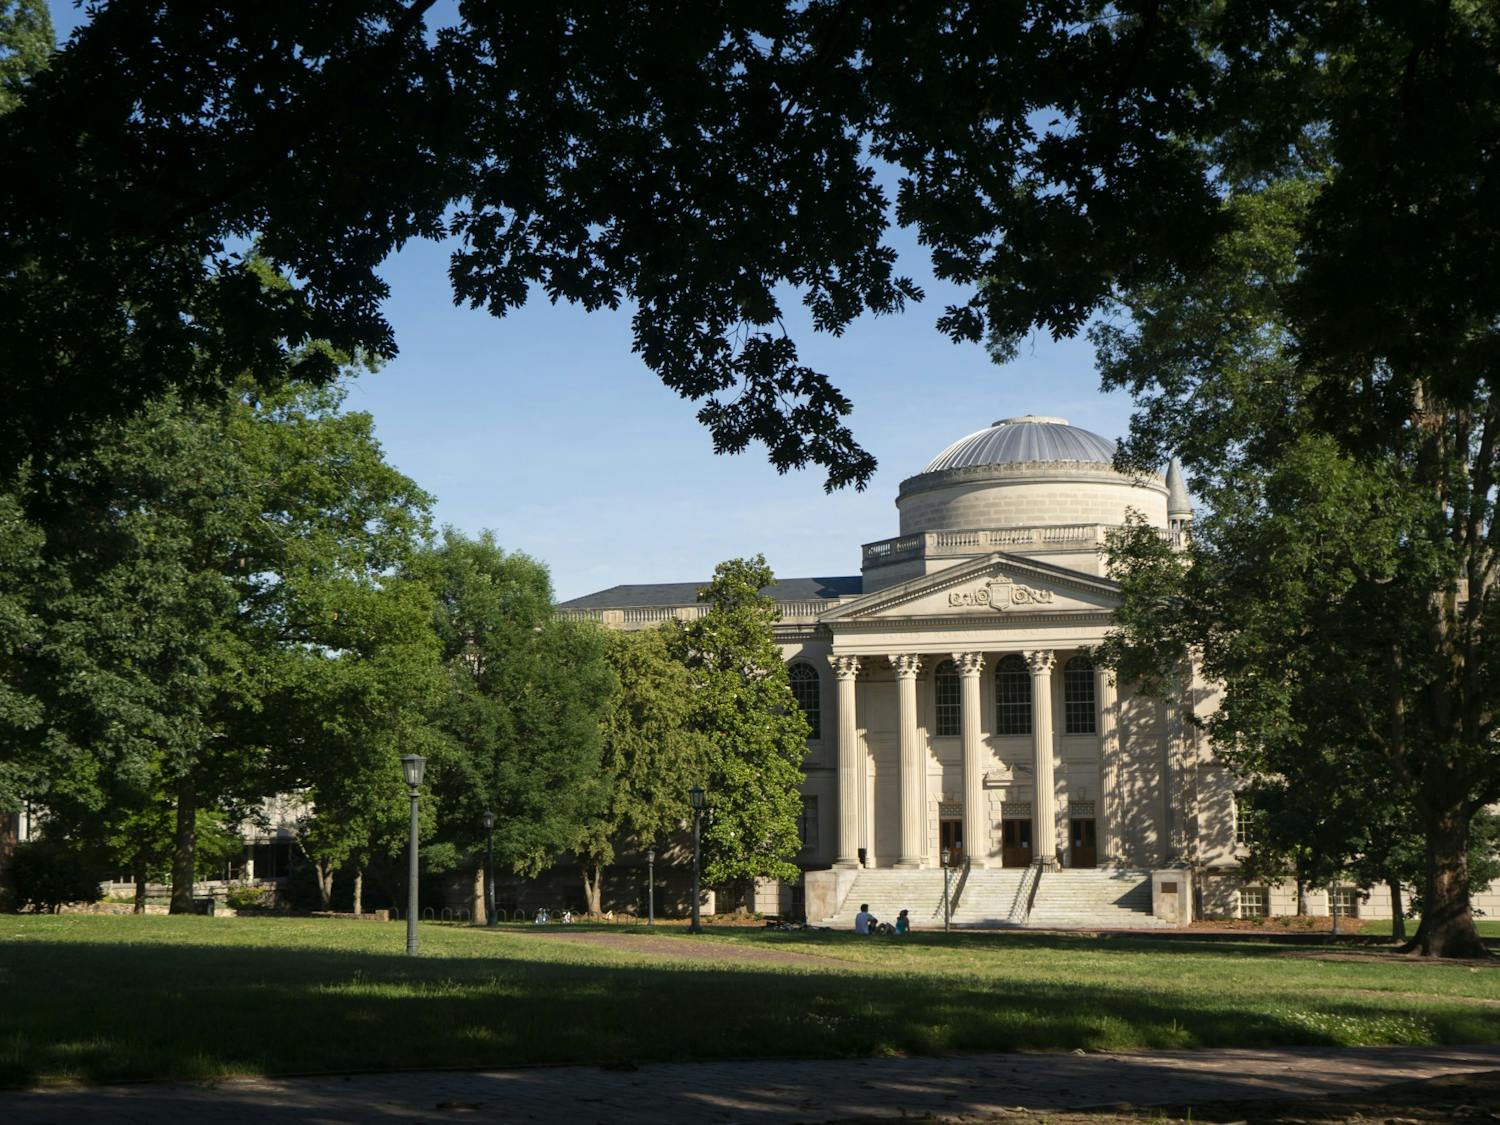 Wilson Library and Polk Place, or the quad, pictured on June 7, 2020.